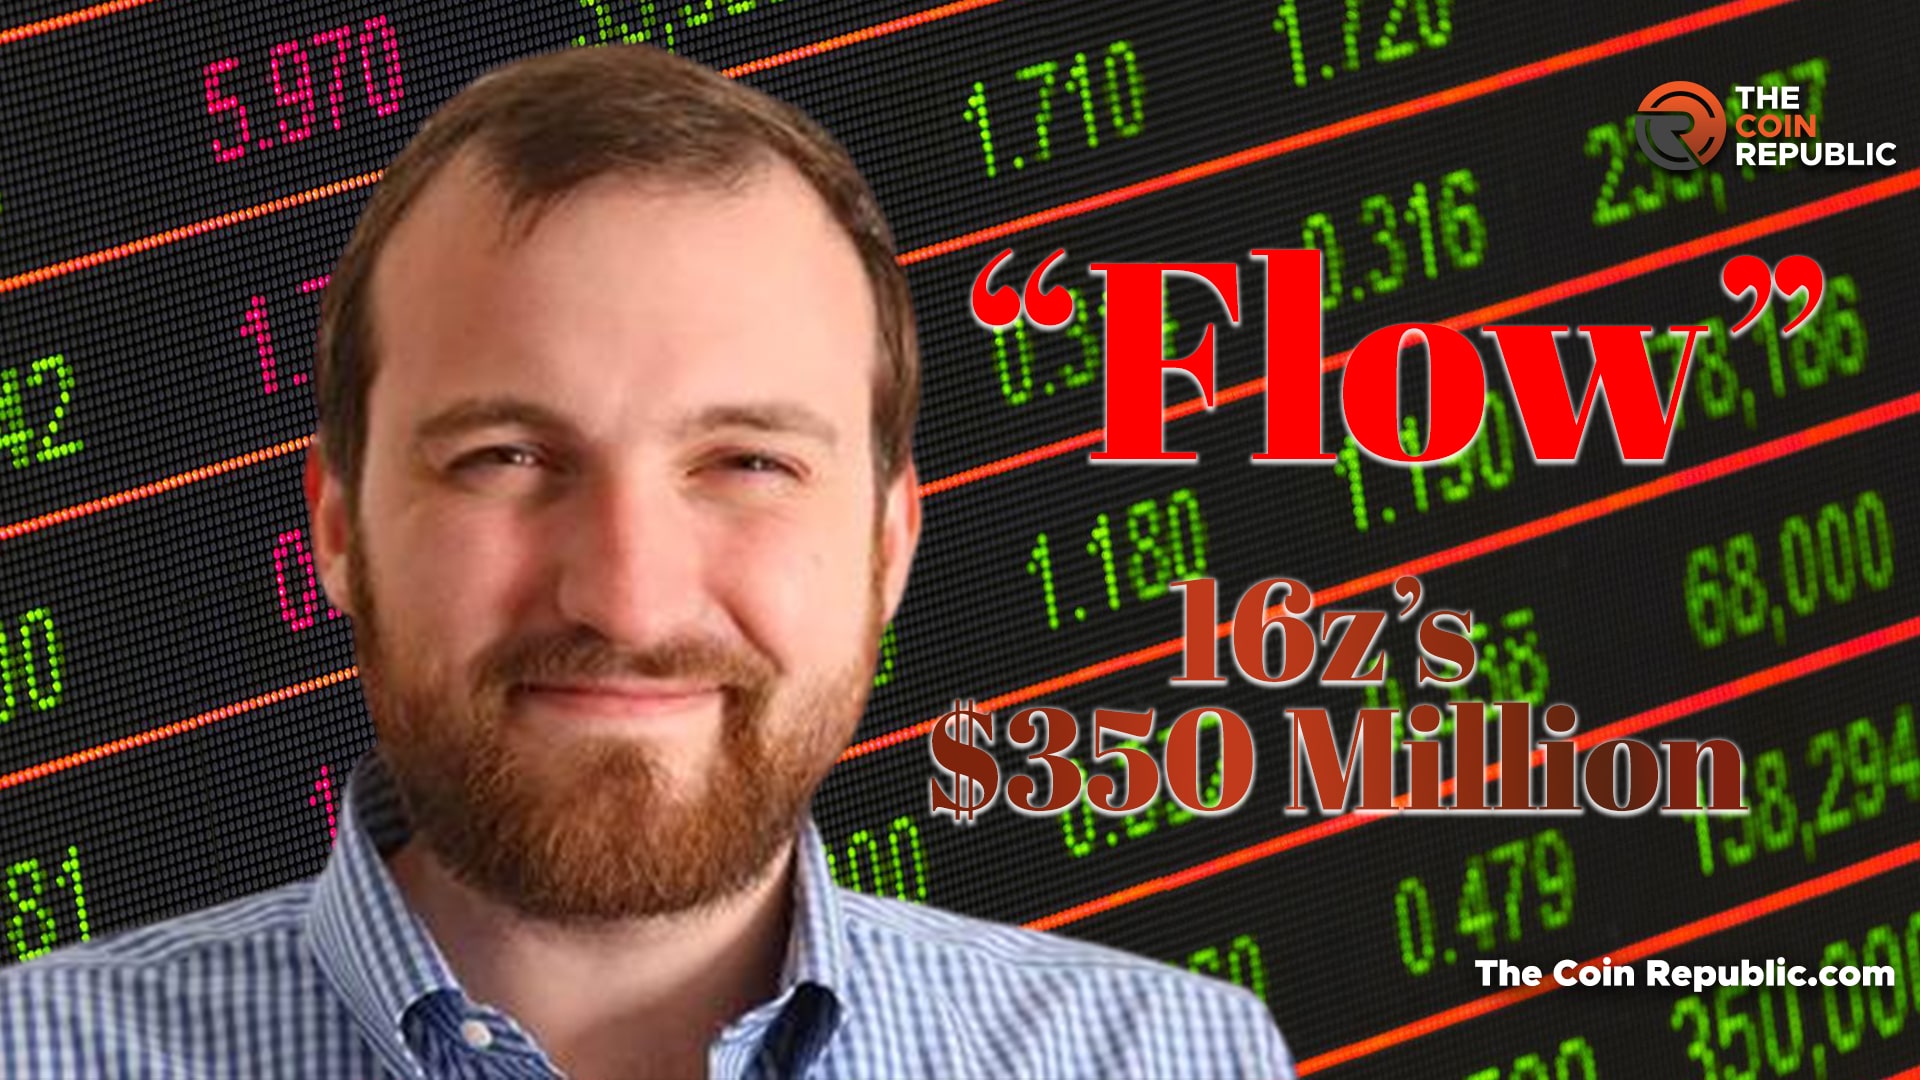 Charles Hoskinson Stood Cold-Feet Over $350 Mn Investment in “Flow”